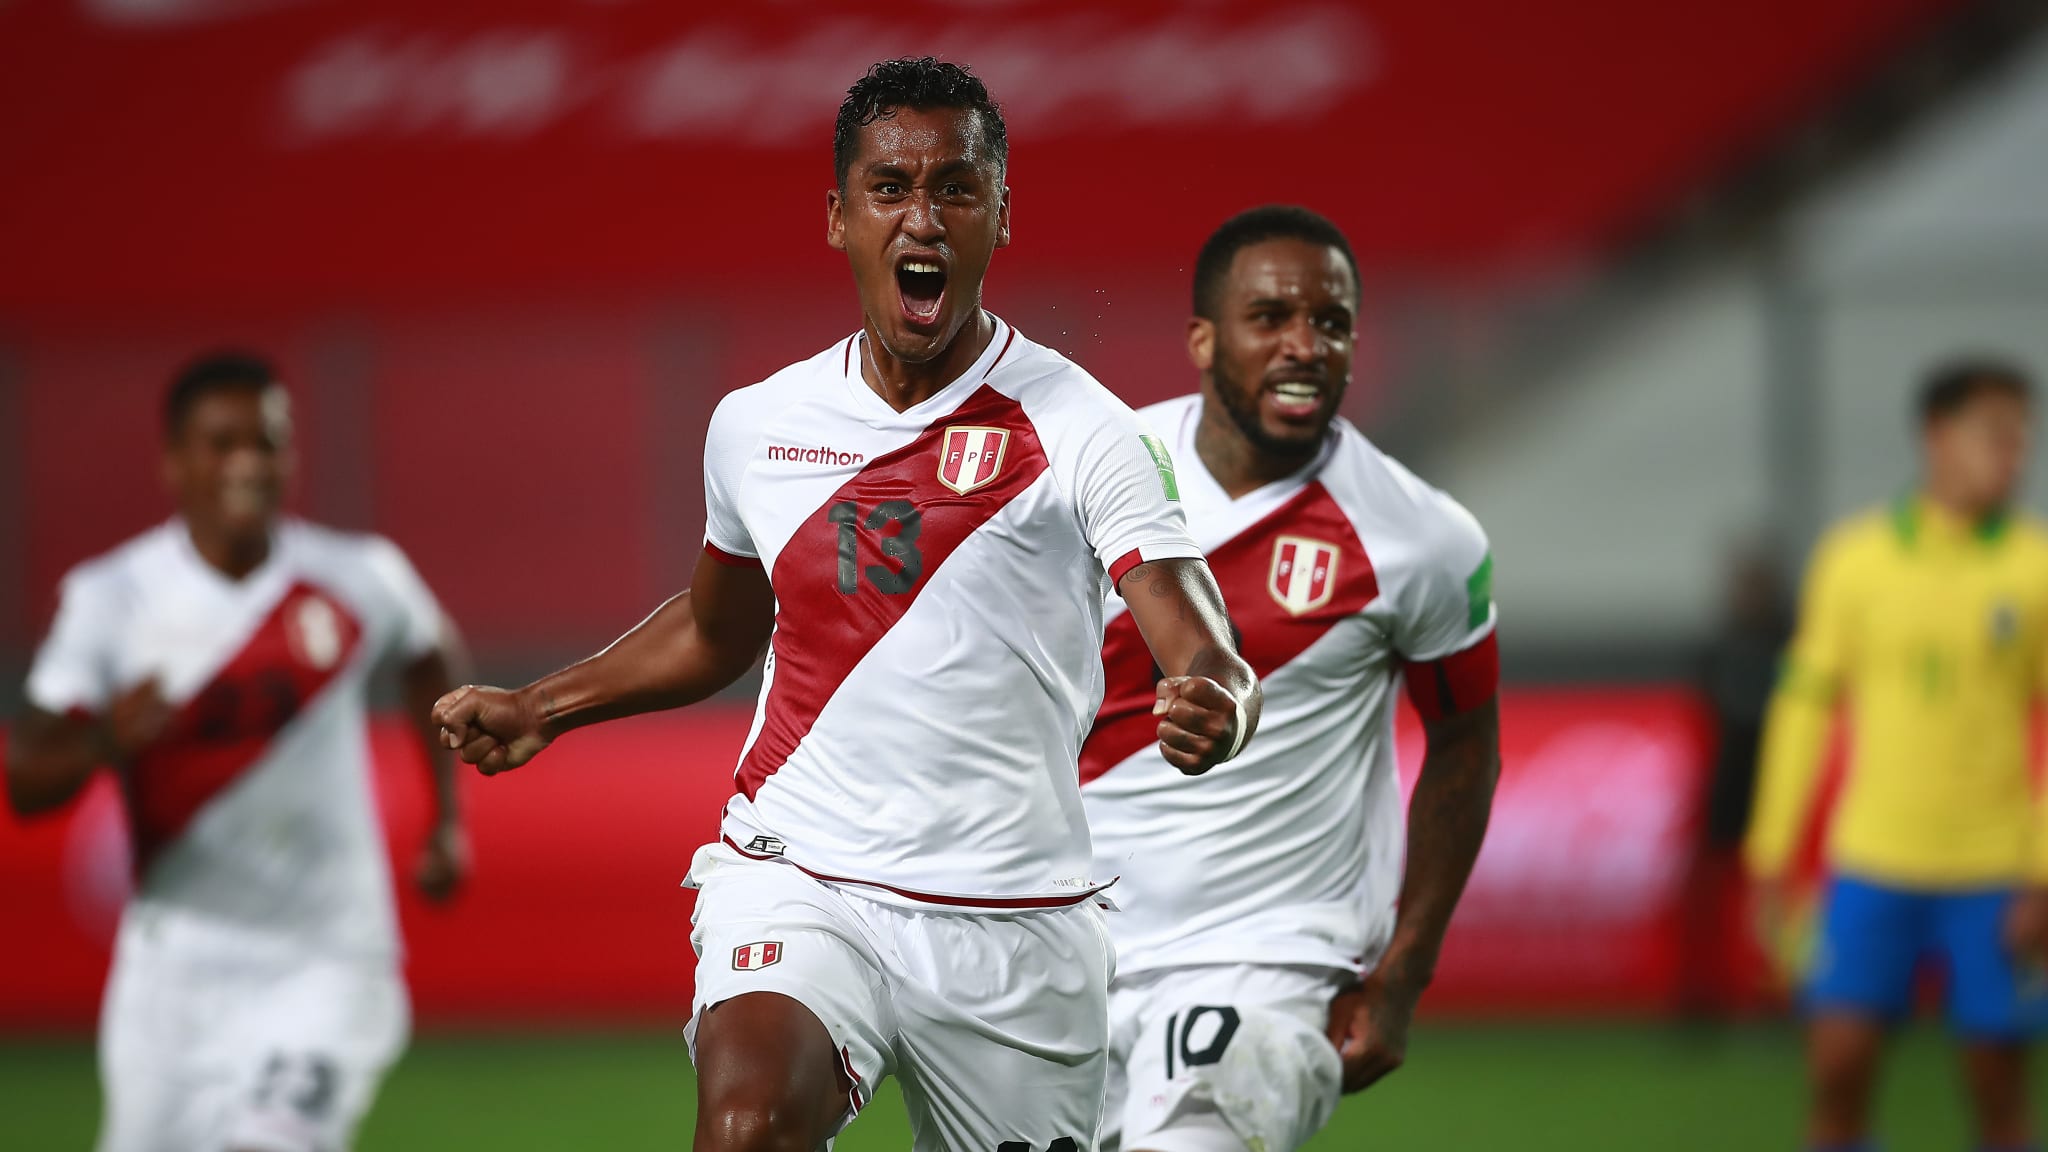 FIFA World Cup 2022™: I'm absolutely certain Peru will qualify